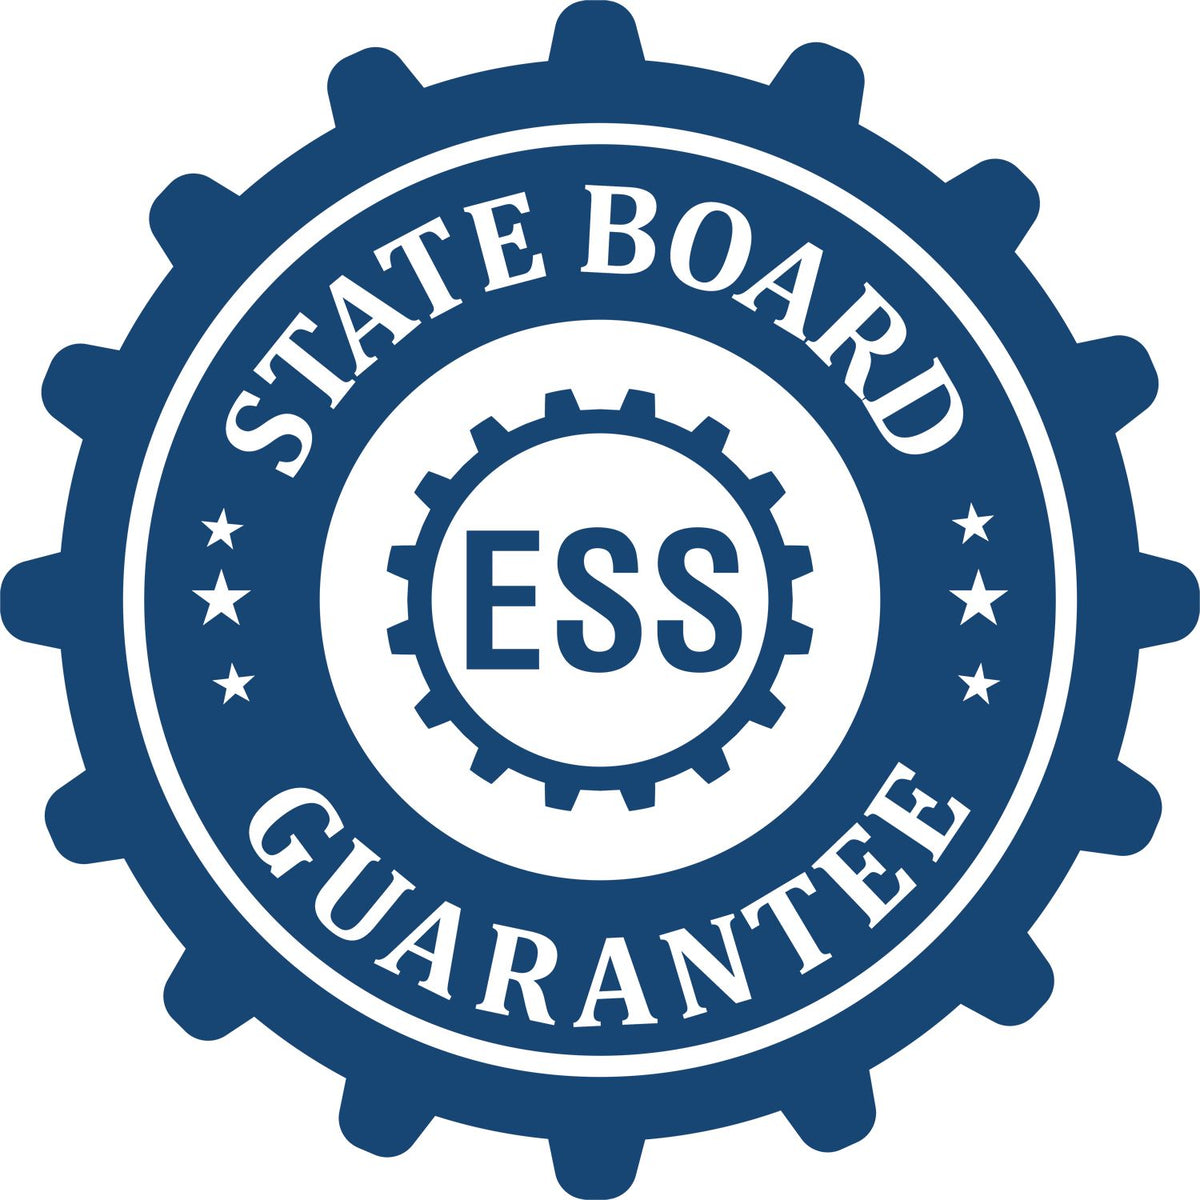 An emblem in a gear shape illustrating a state board guarantee for the Hybrid Idaho Landscape Architect Seal